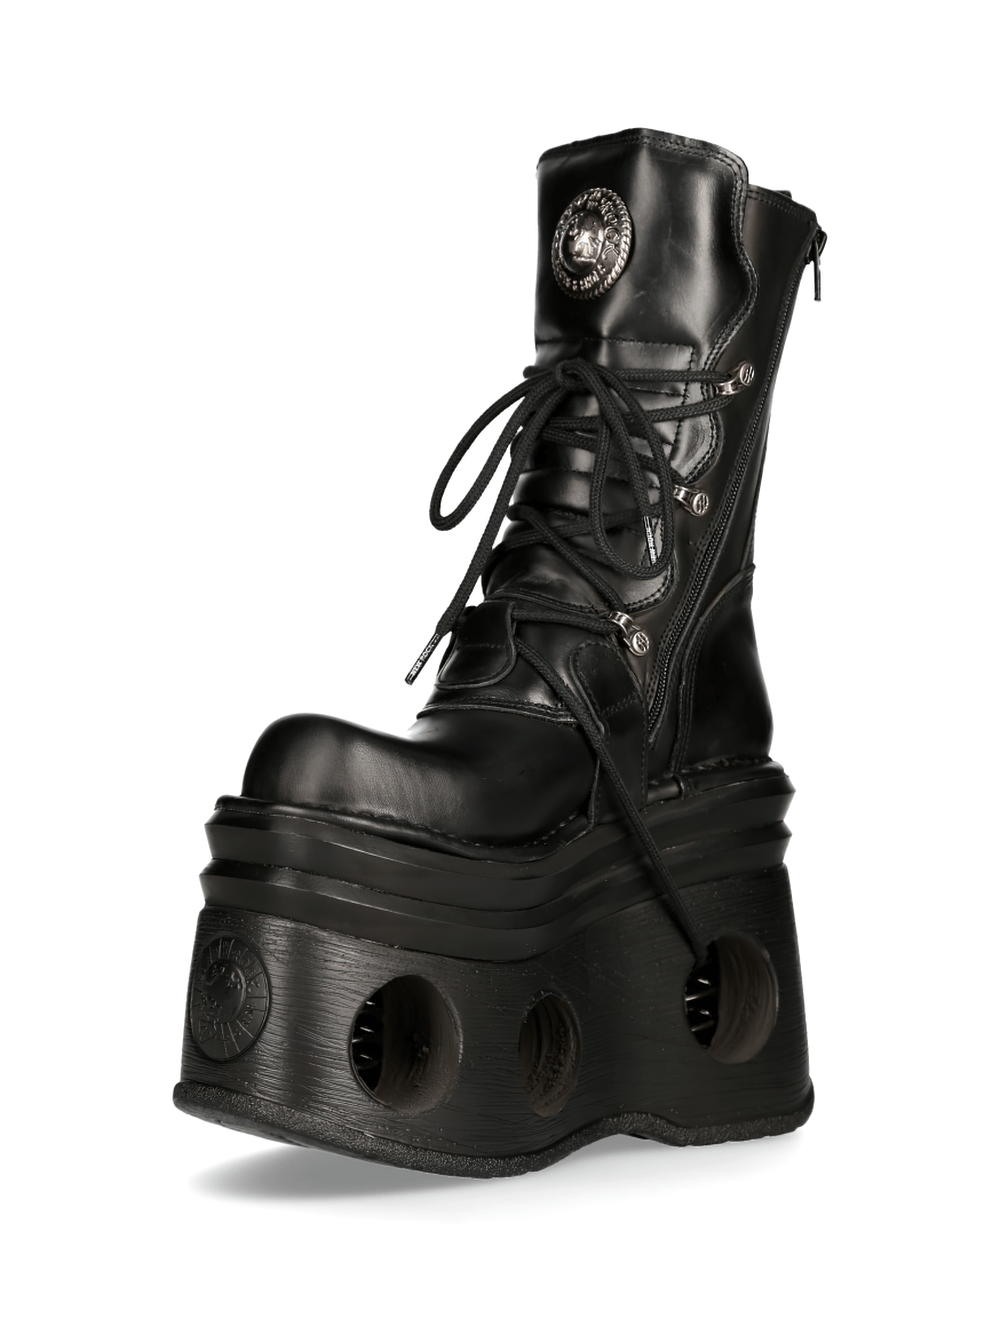 NEW ROCK Gothic Buckled Platform Boots - Unisex Cow Leather